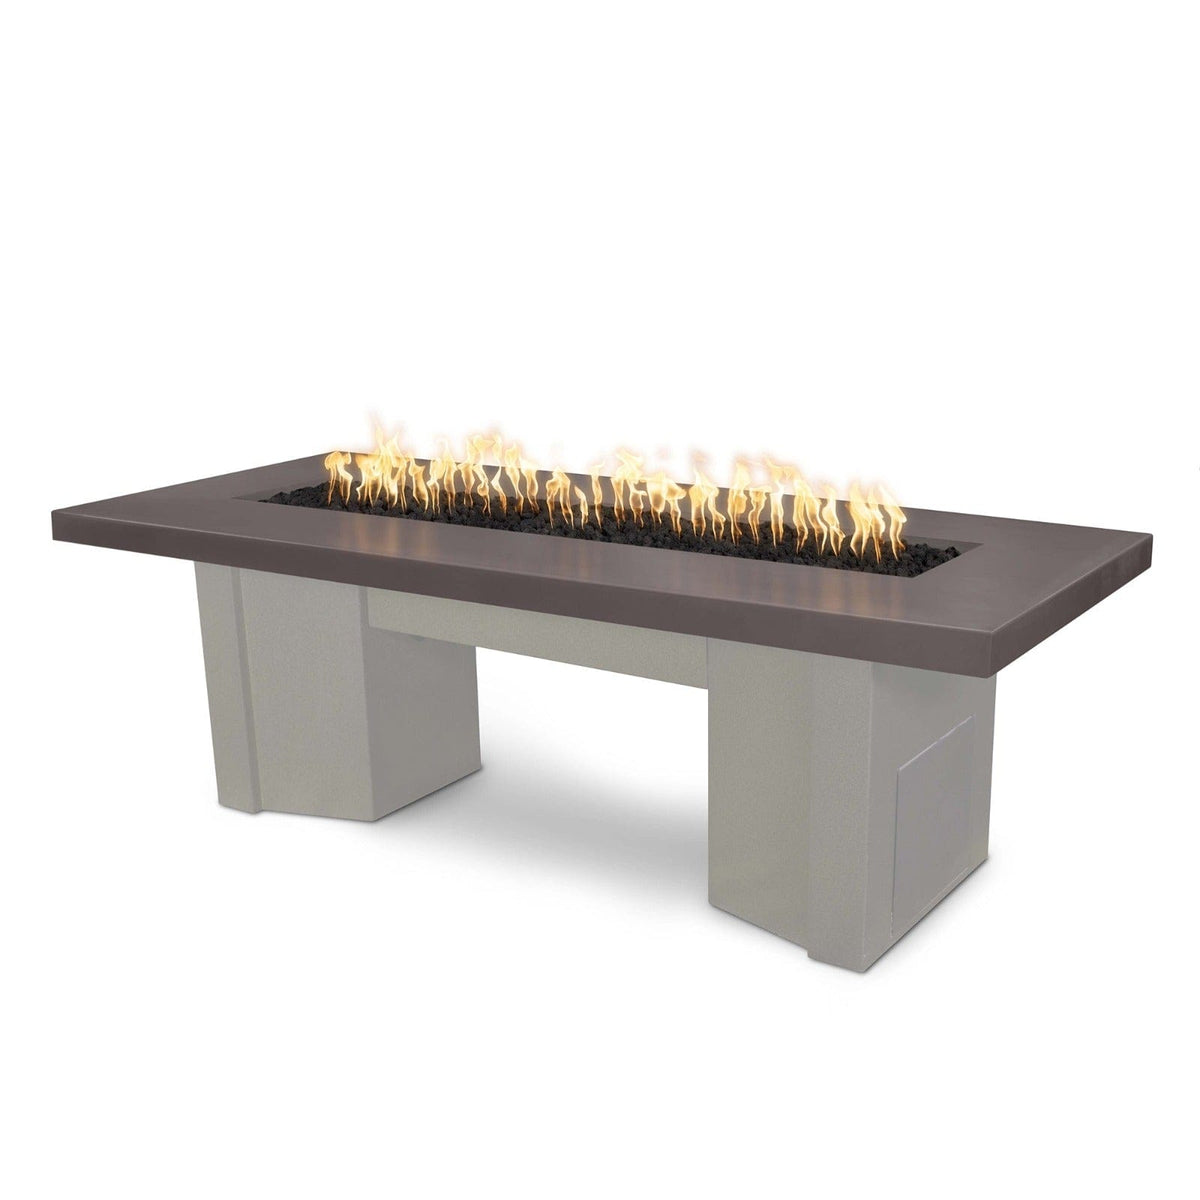 The Outdoor Plus Fire Features Chestnut (-CST) / Pewter Powder Coated Steel (-PEW) The Outdoor Plus 78&quot; Alameda Fire Table Smooth Concrete in Liquid Propane - Flame Sense System with Push Button Spark Igniter / OPT-ALMGFRC78FSEN-LP